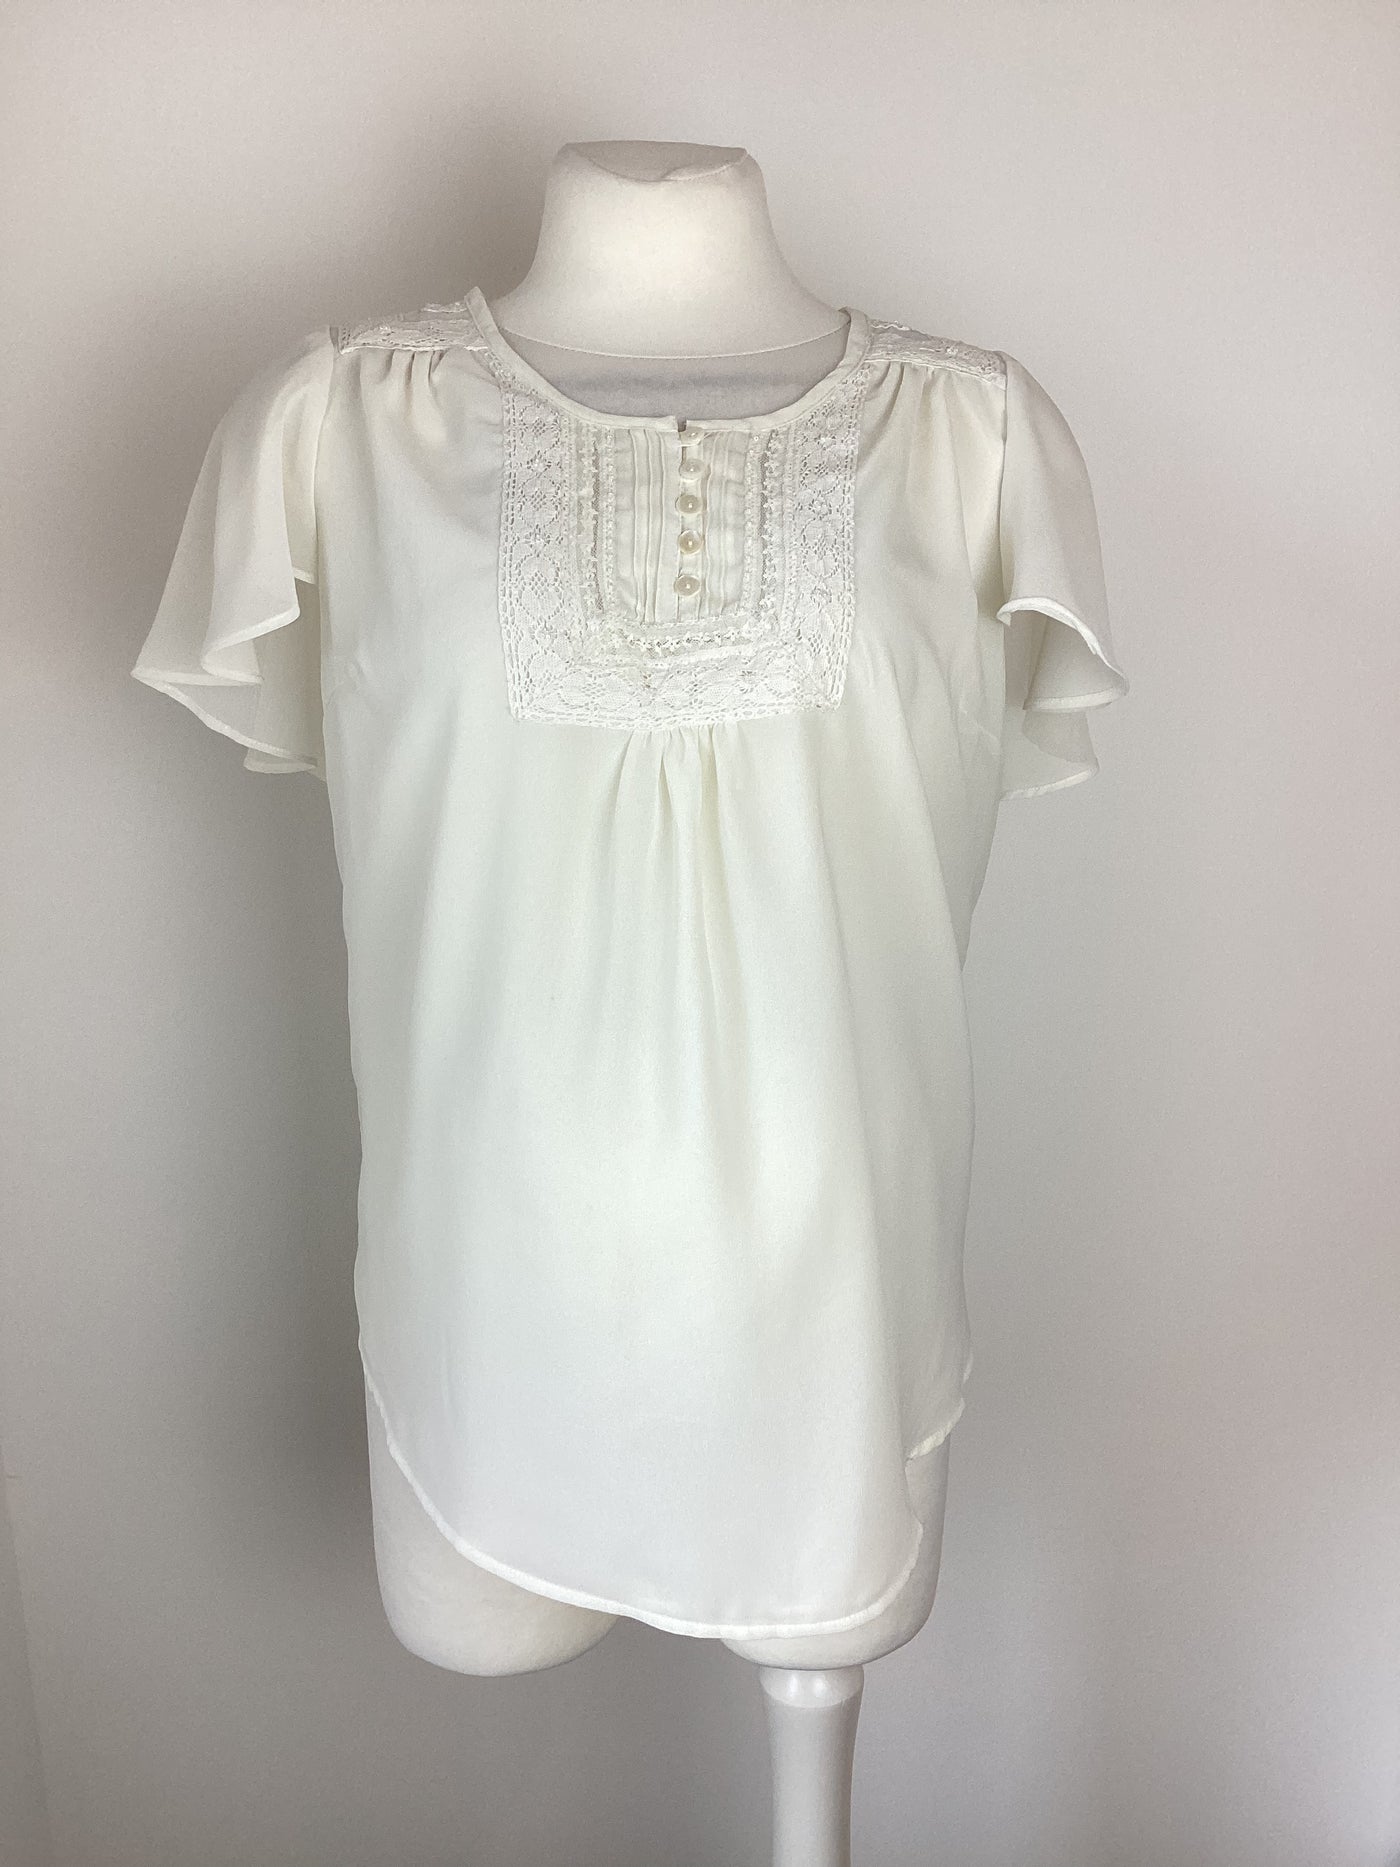 New Look Maternity cream short sleeved top with lace detail - Size 8